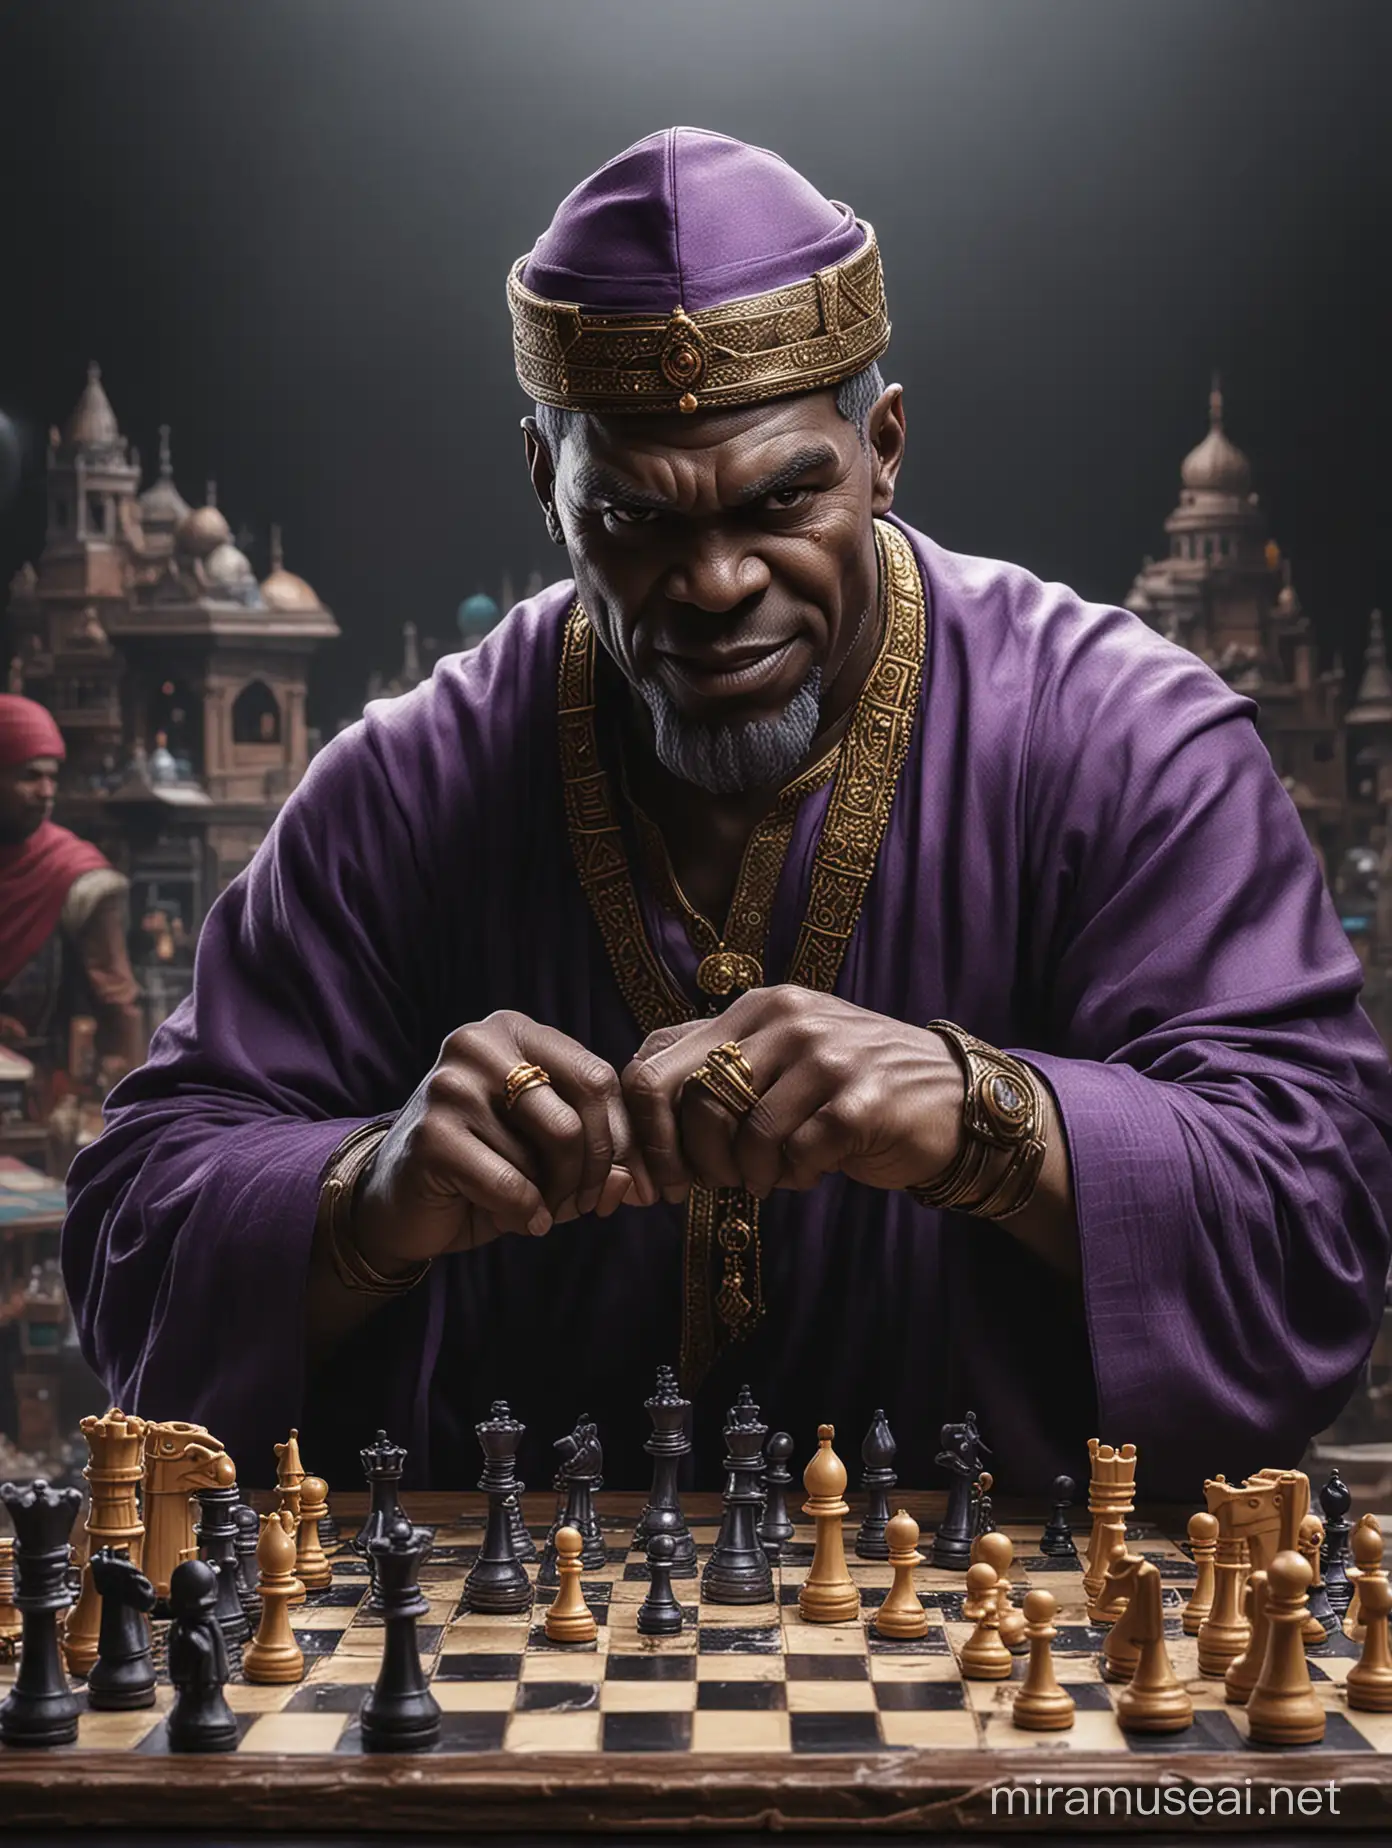 Thanos purple skin, dressed in a traditional Muslim attire (koko), wearing a peci (traditional Indonesian cap), and with big five gemstone rings on each of his five fingers, playing chess with superhero Ant-Man in his miniature form, lifting a chess piece, against the backdrop of a bustling Jakarta market. Accompanied by the text "The Festivities of Thanos on Eid Day," set against a high-contrast black background to create a dramatic effect suitable for printing in DTF (Direct-to-Film) Printing or water-based color printing. Ensure the image and background are centered and uncut.